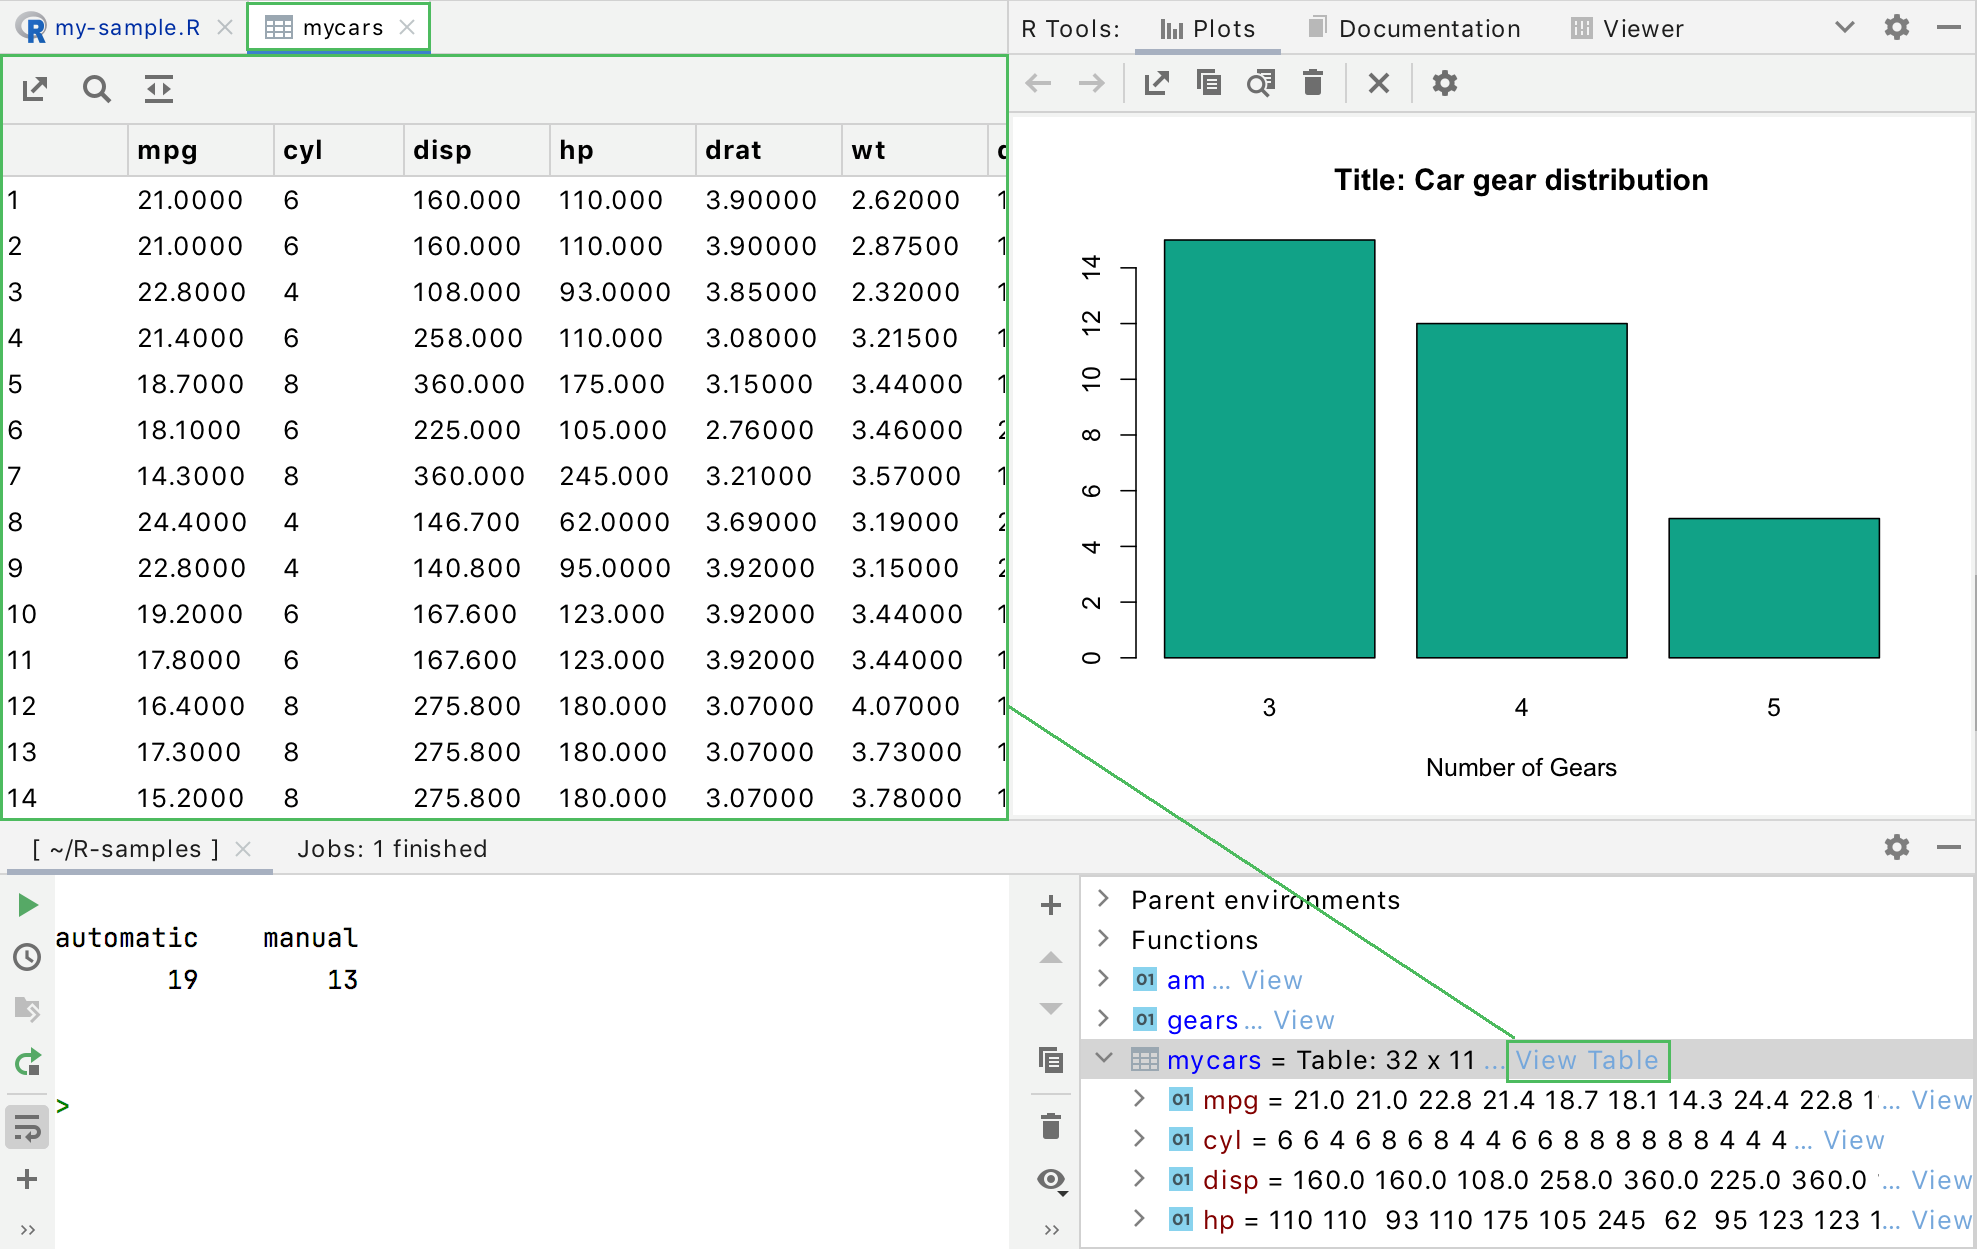 Previewing data in the Table View